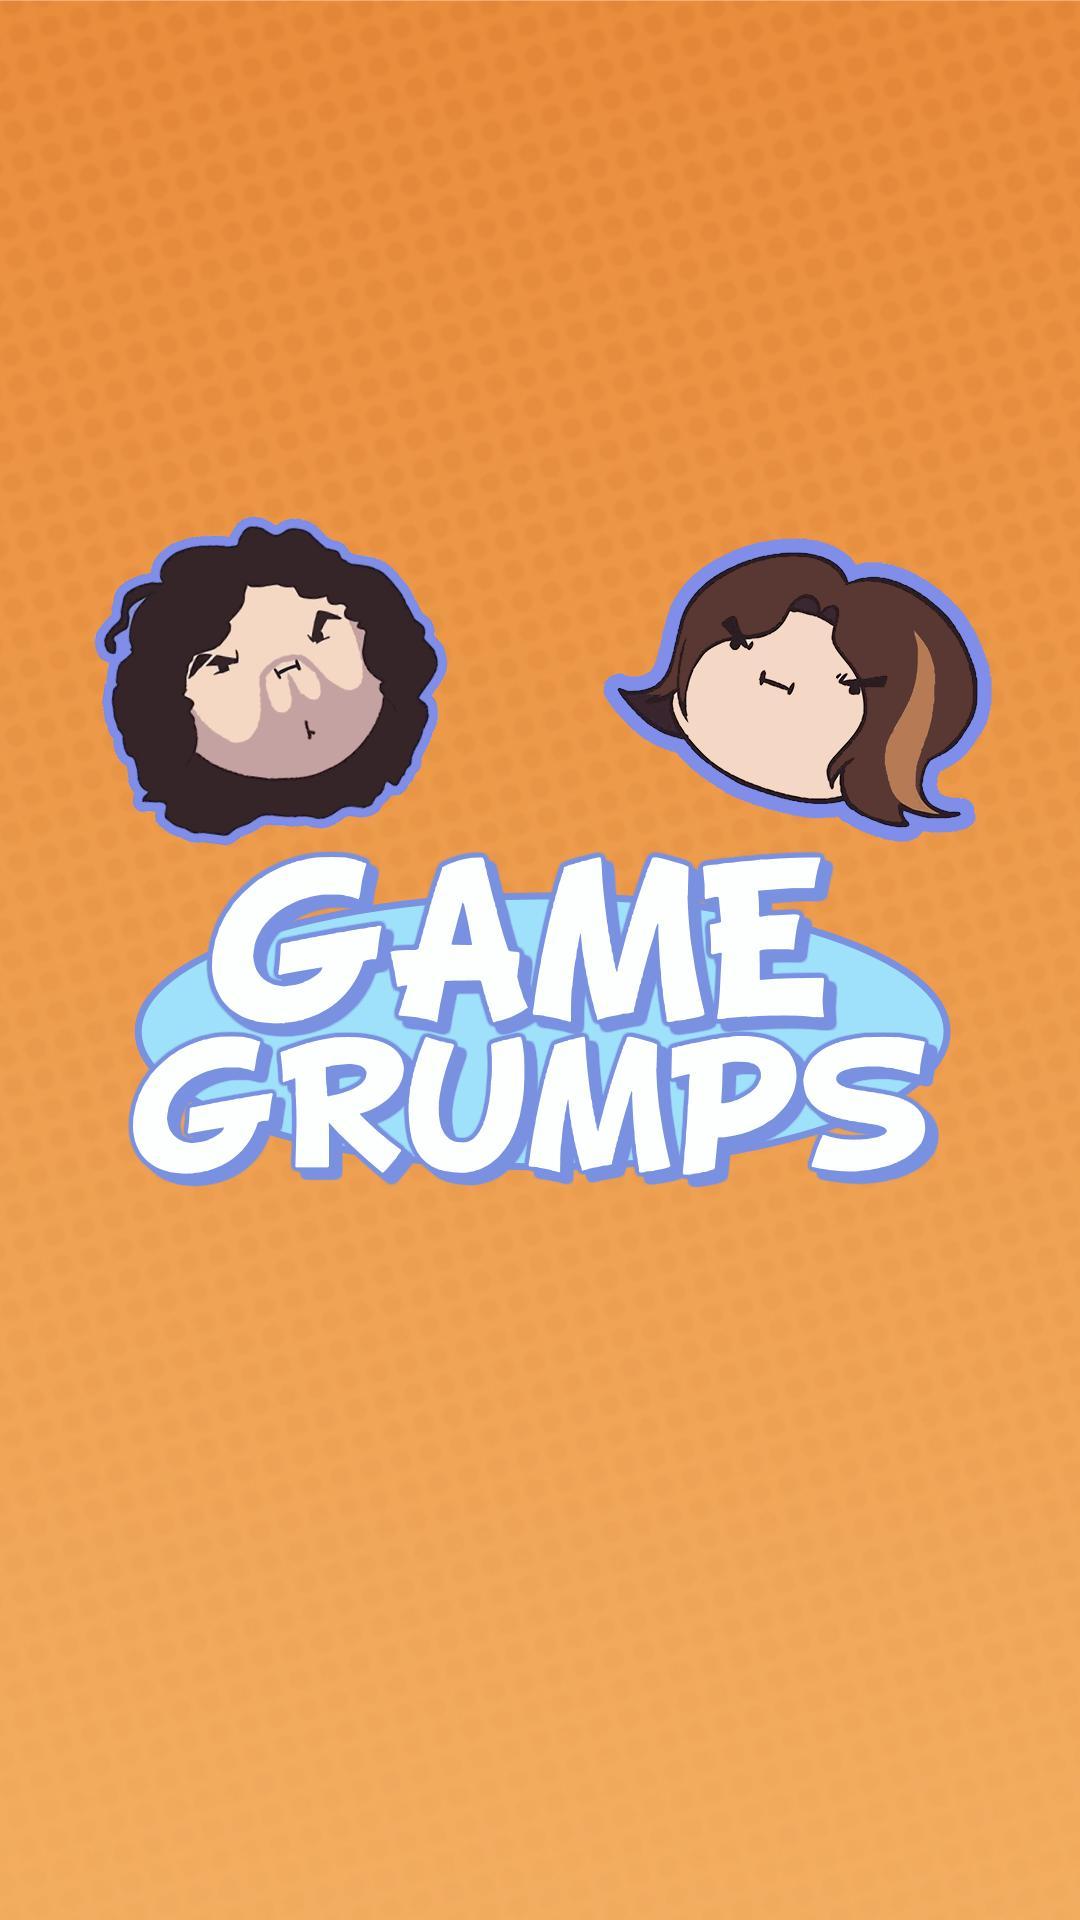 Game Grumps Wallpapers Wallpaper Cave Images, Photos, Reviews